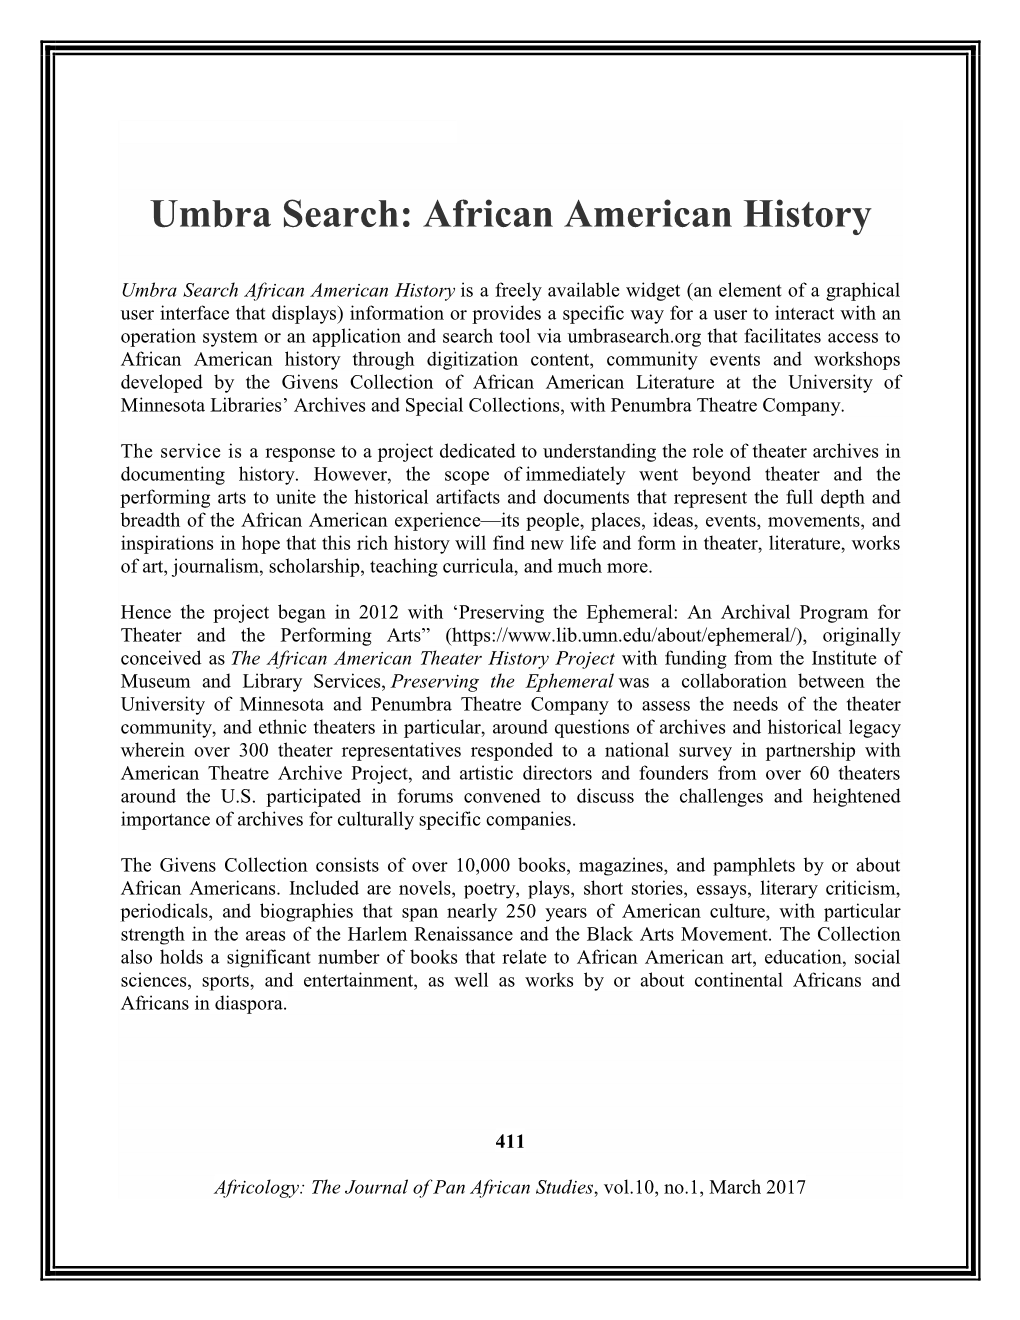 Umbra Search: African American History